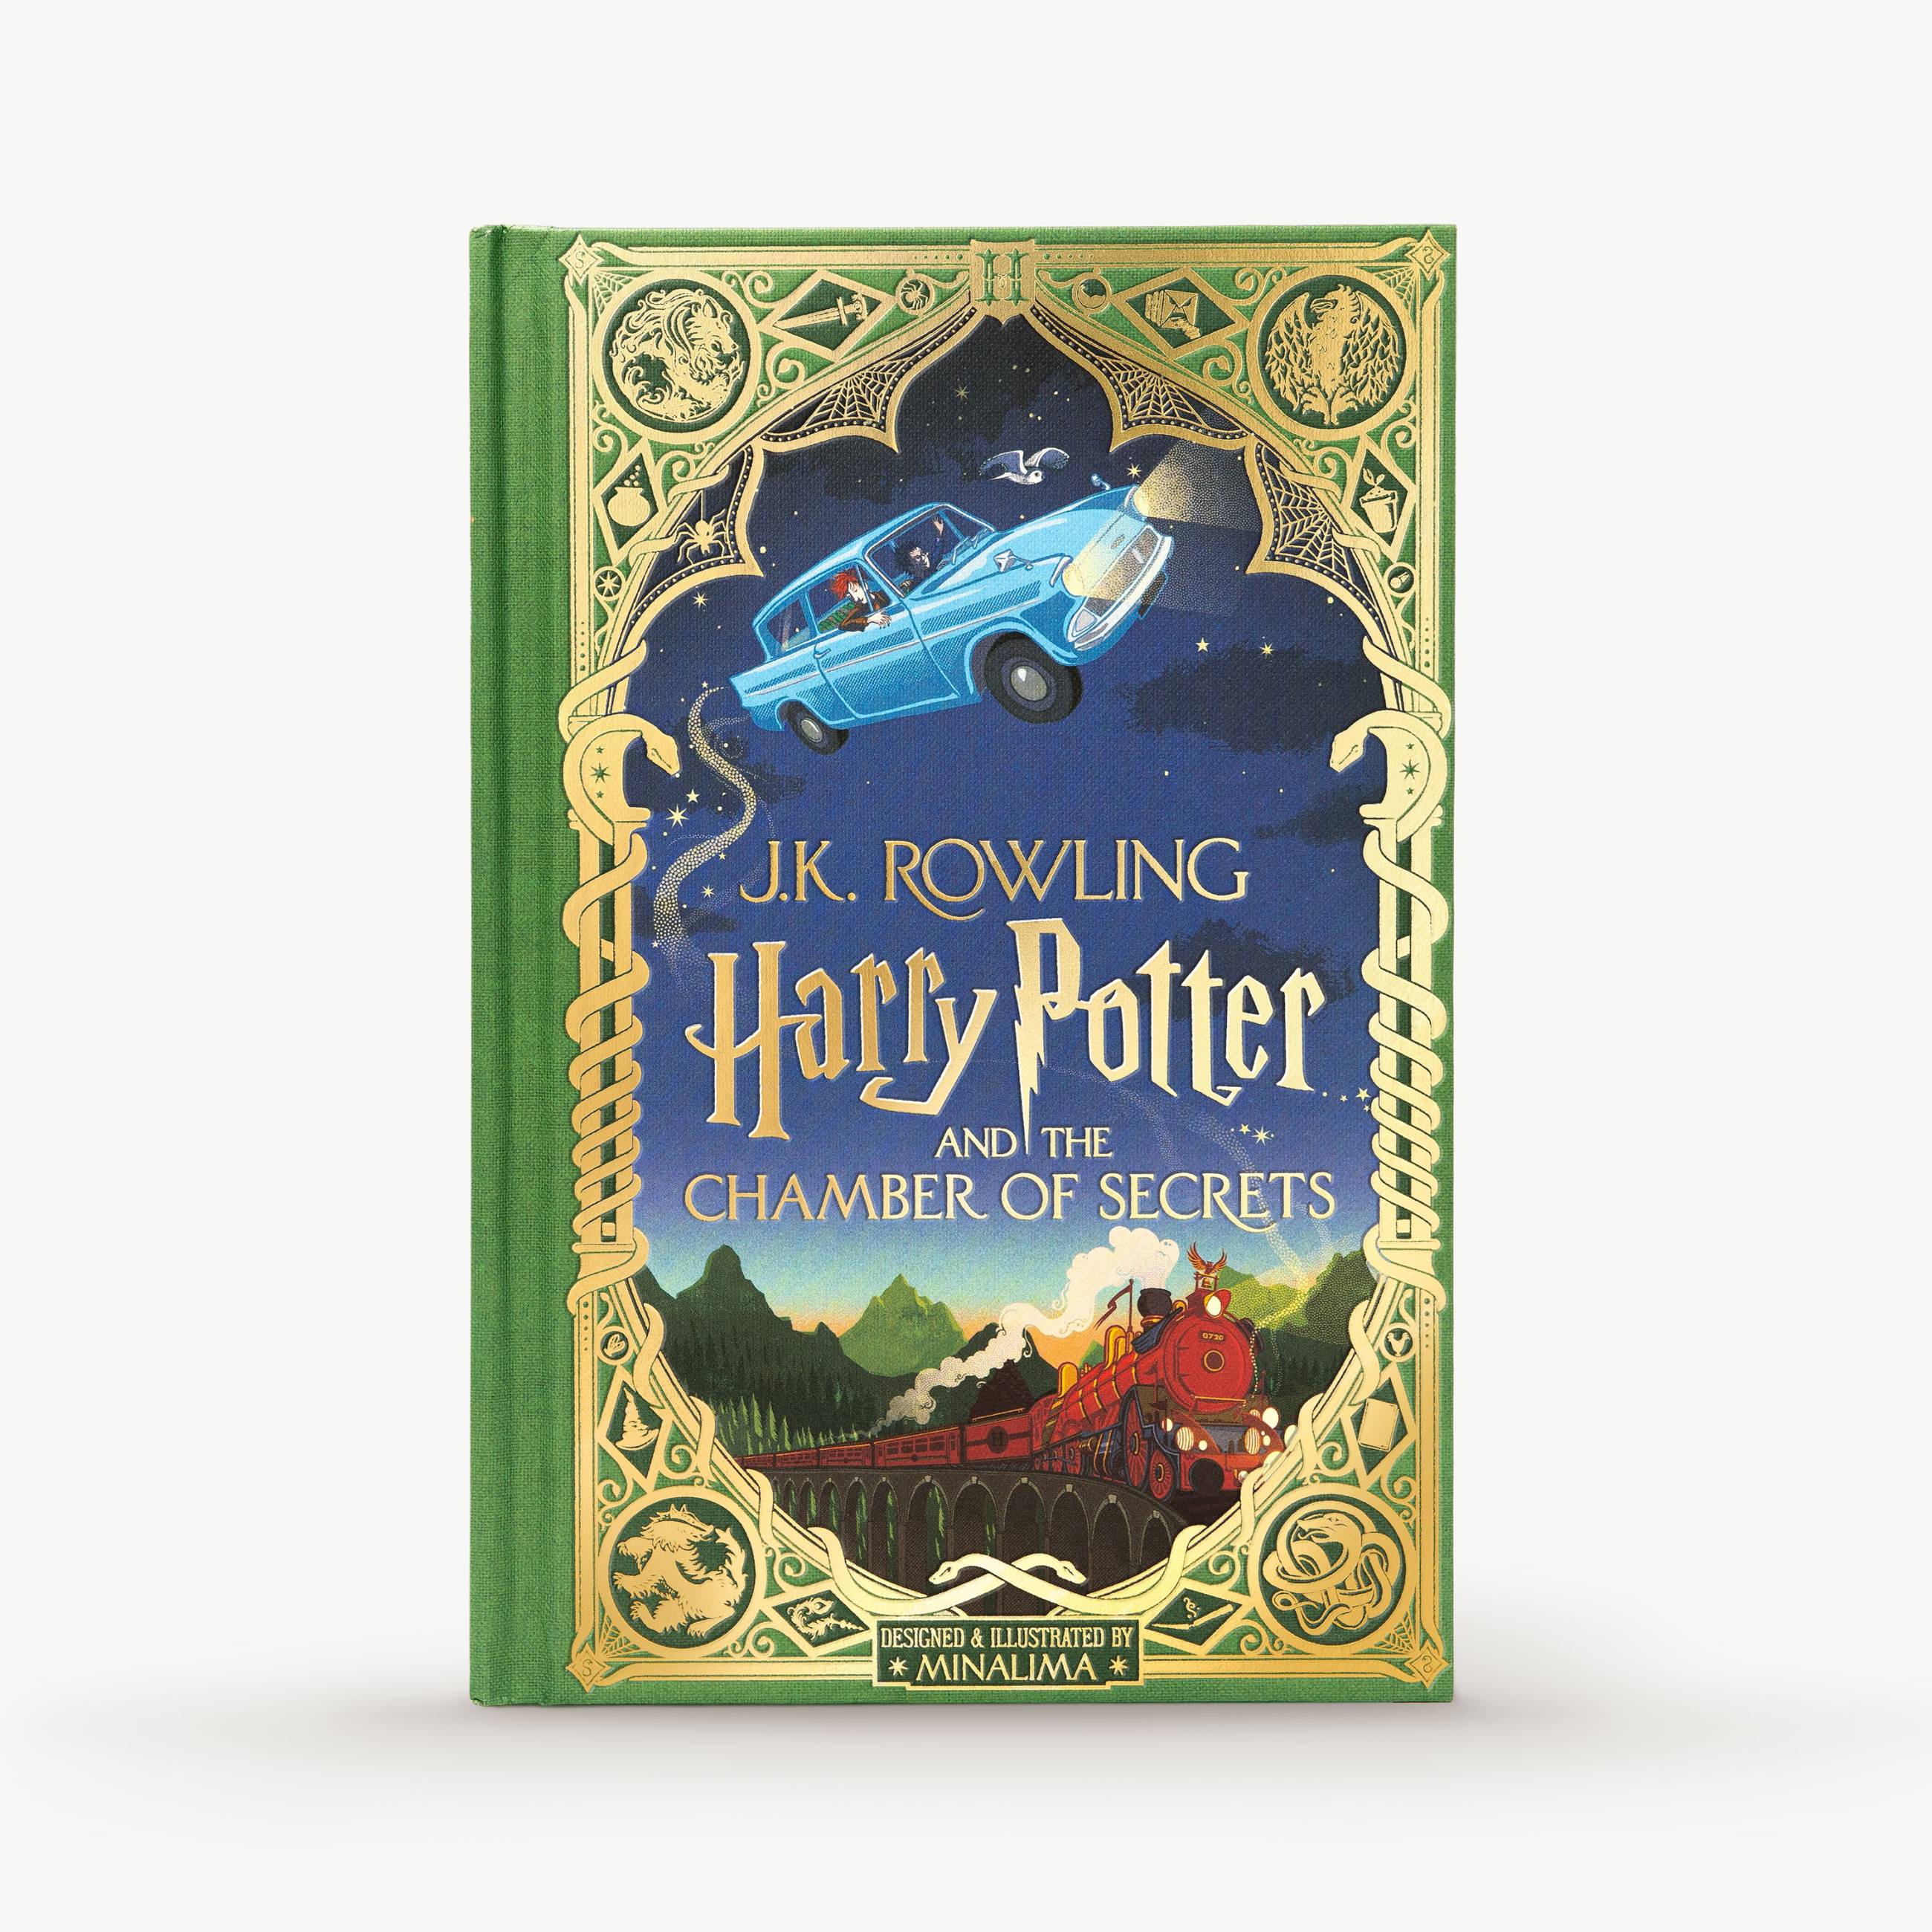 BRAND NEW Harry Potter Edition, Illustrated by MinaLima